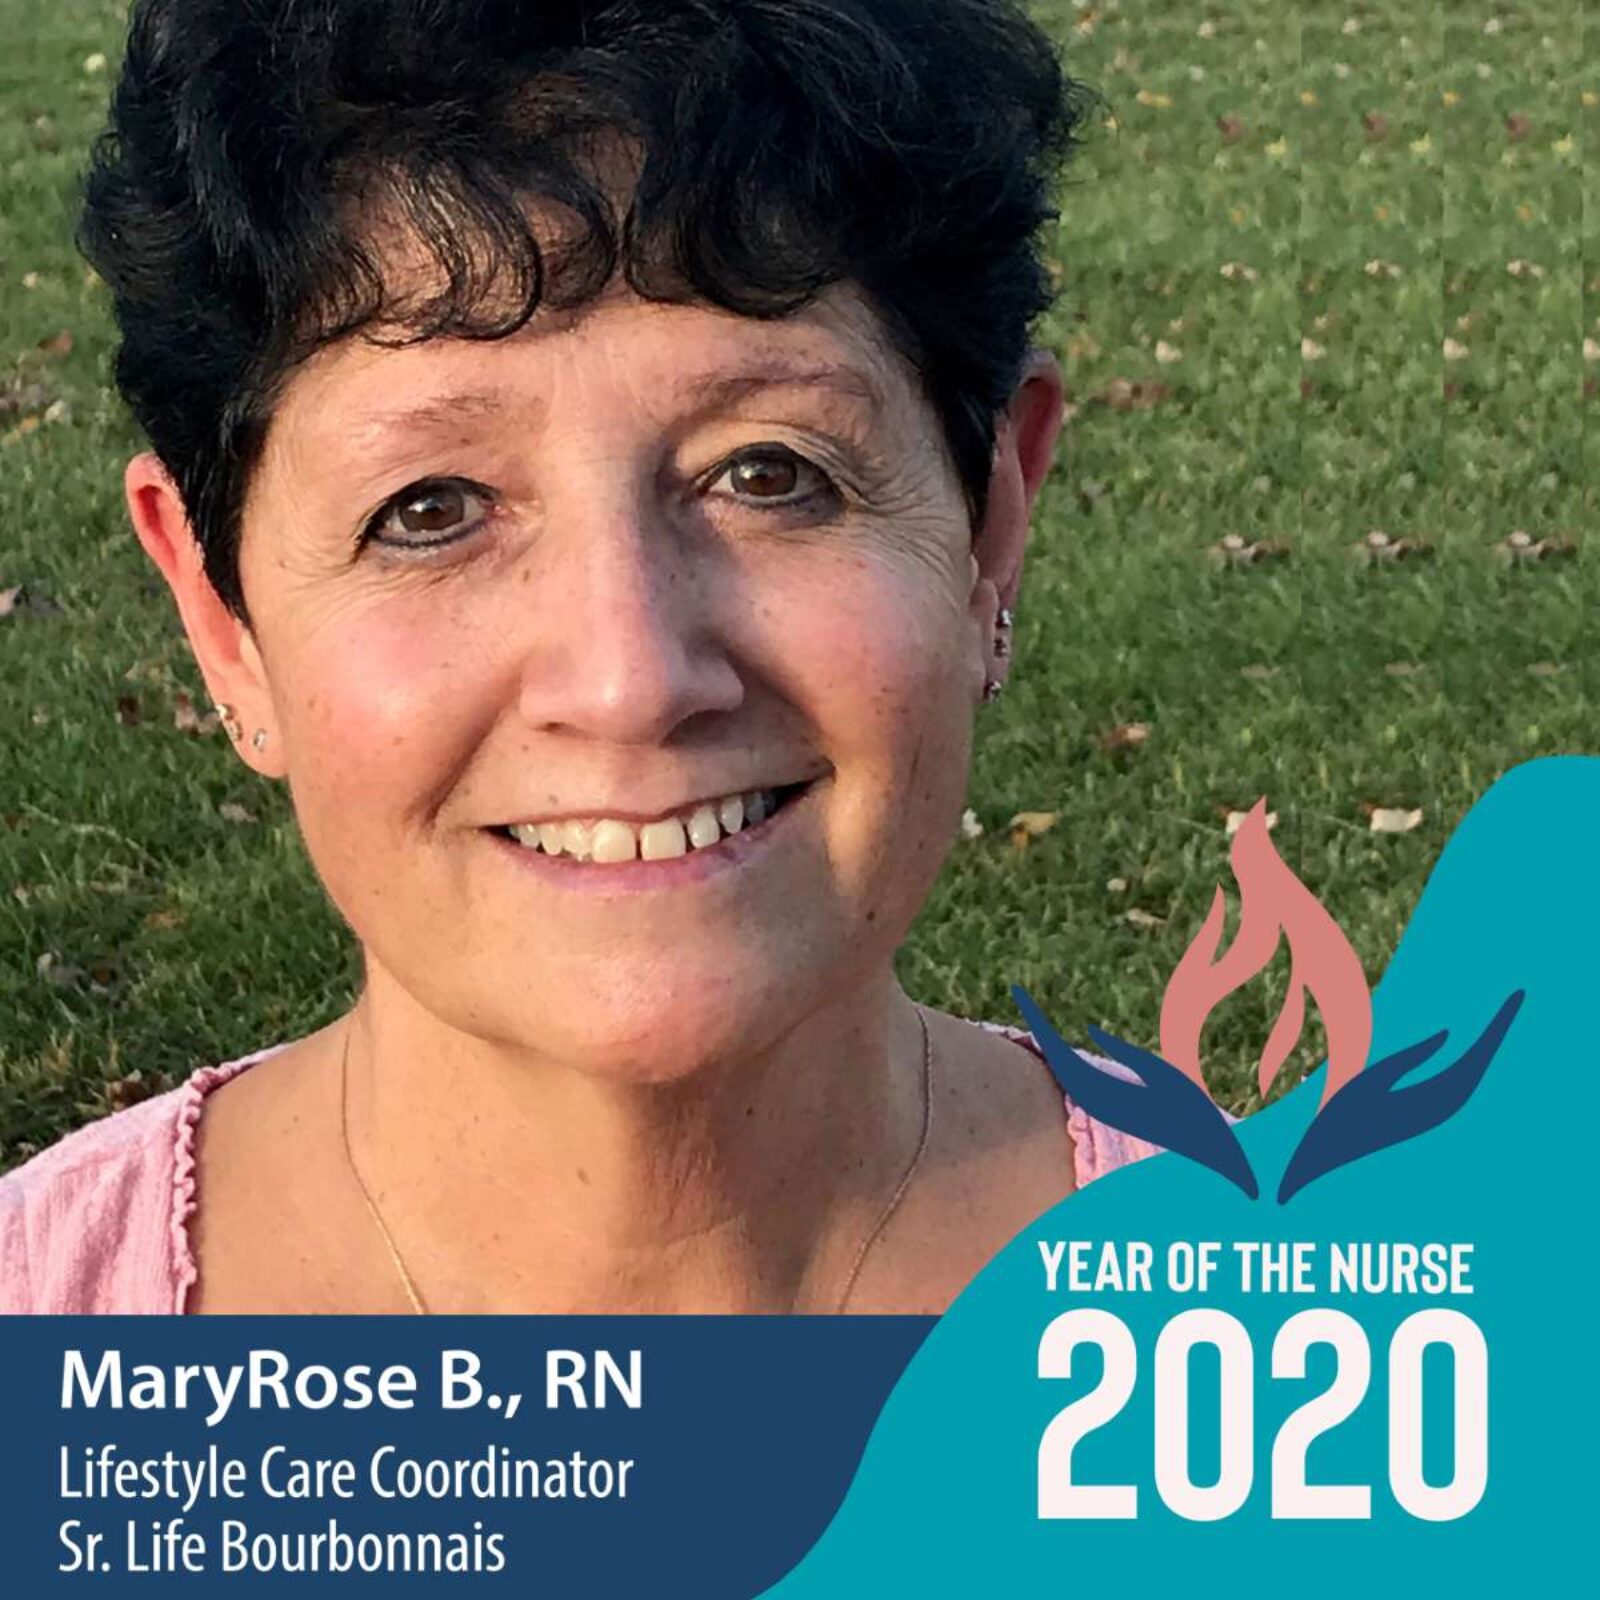 Year of the Nurse Nominee: Mary Rose B., RN